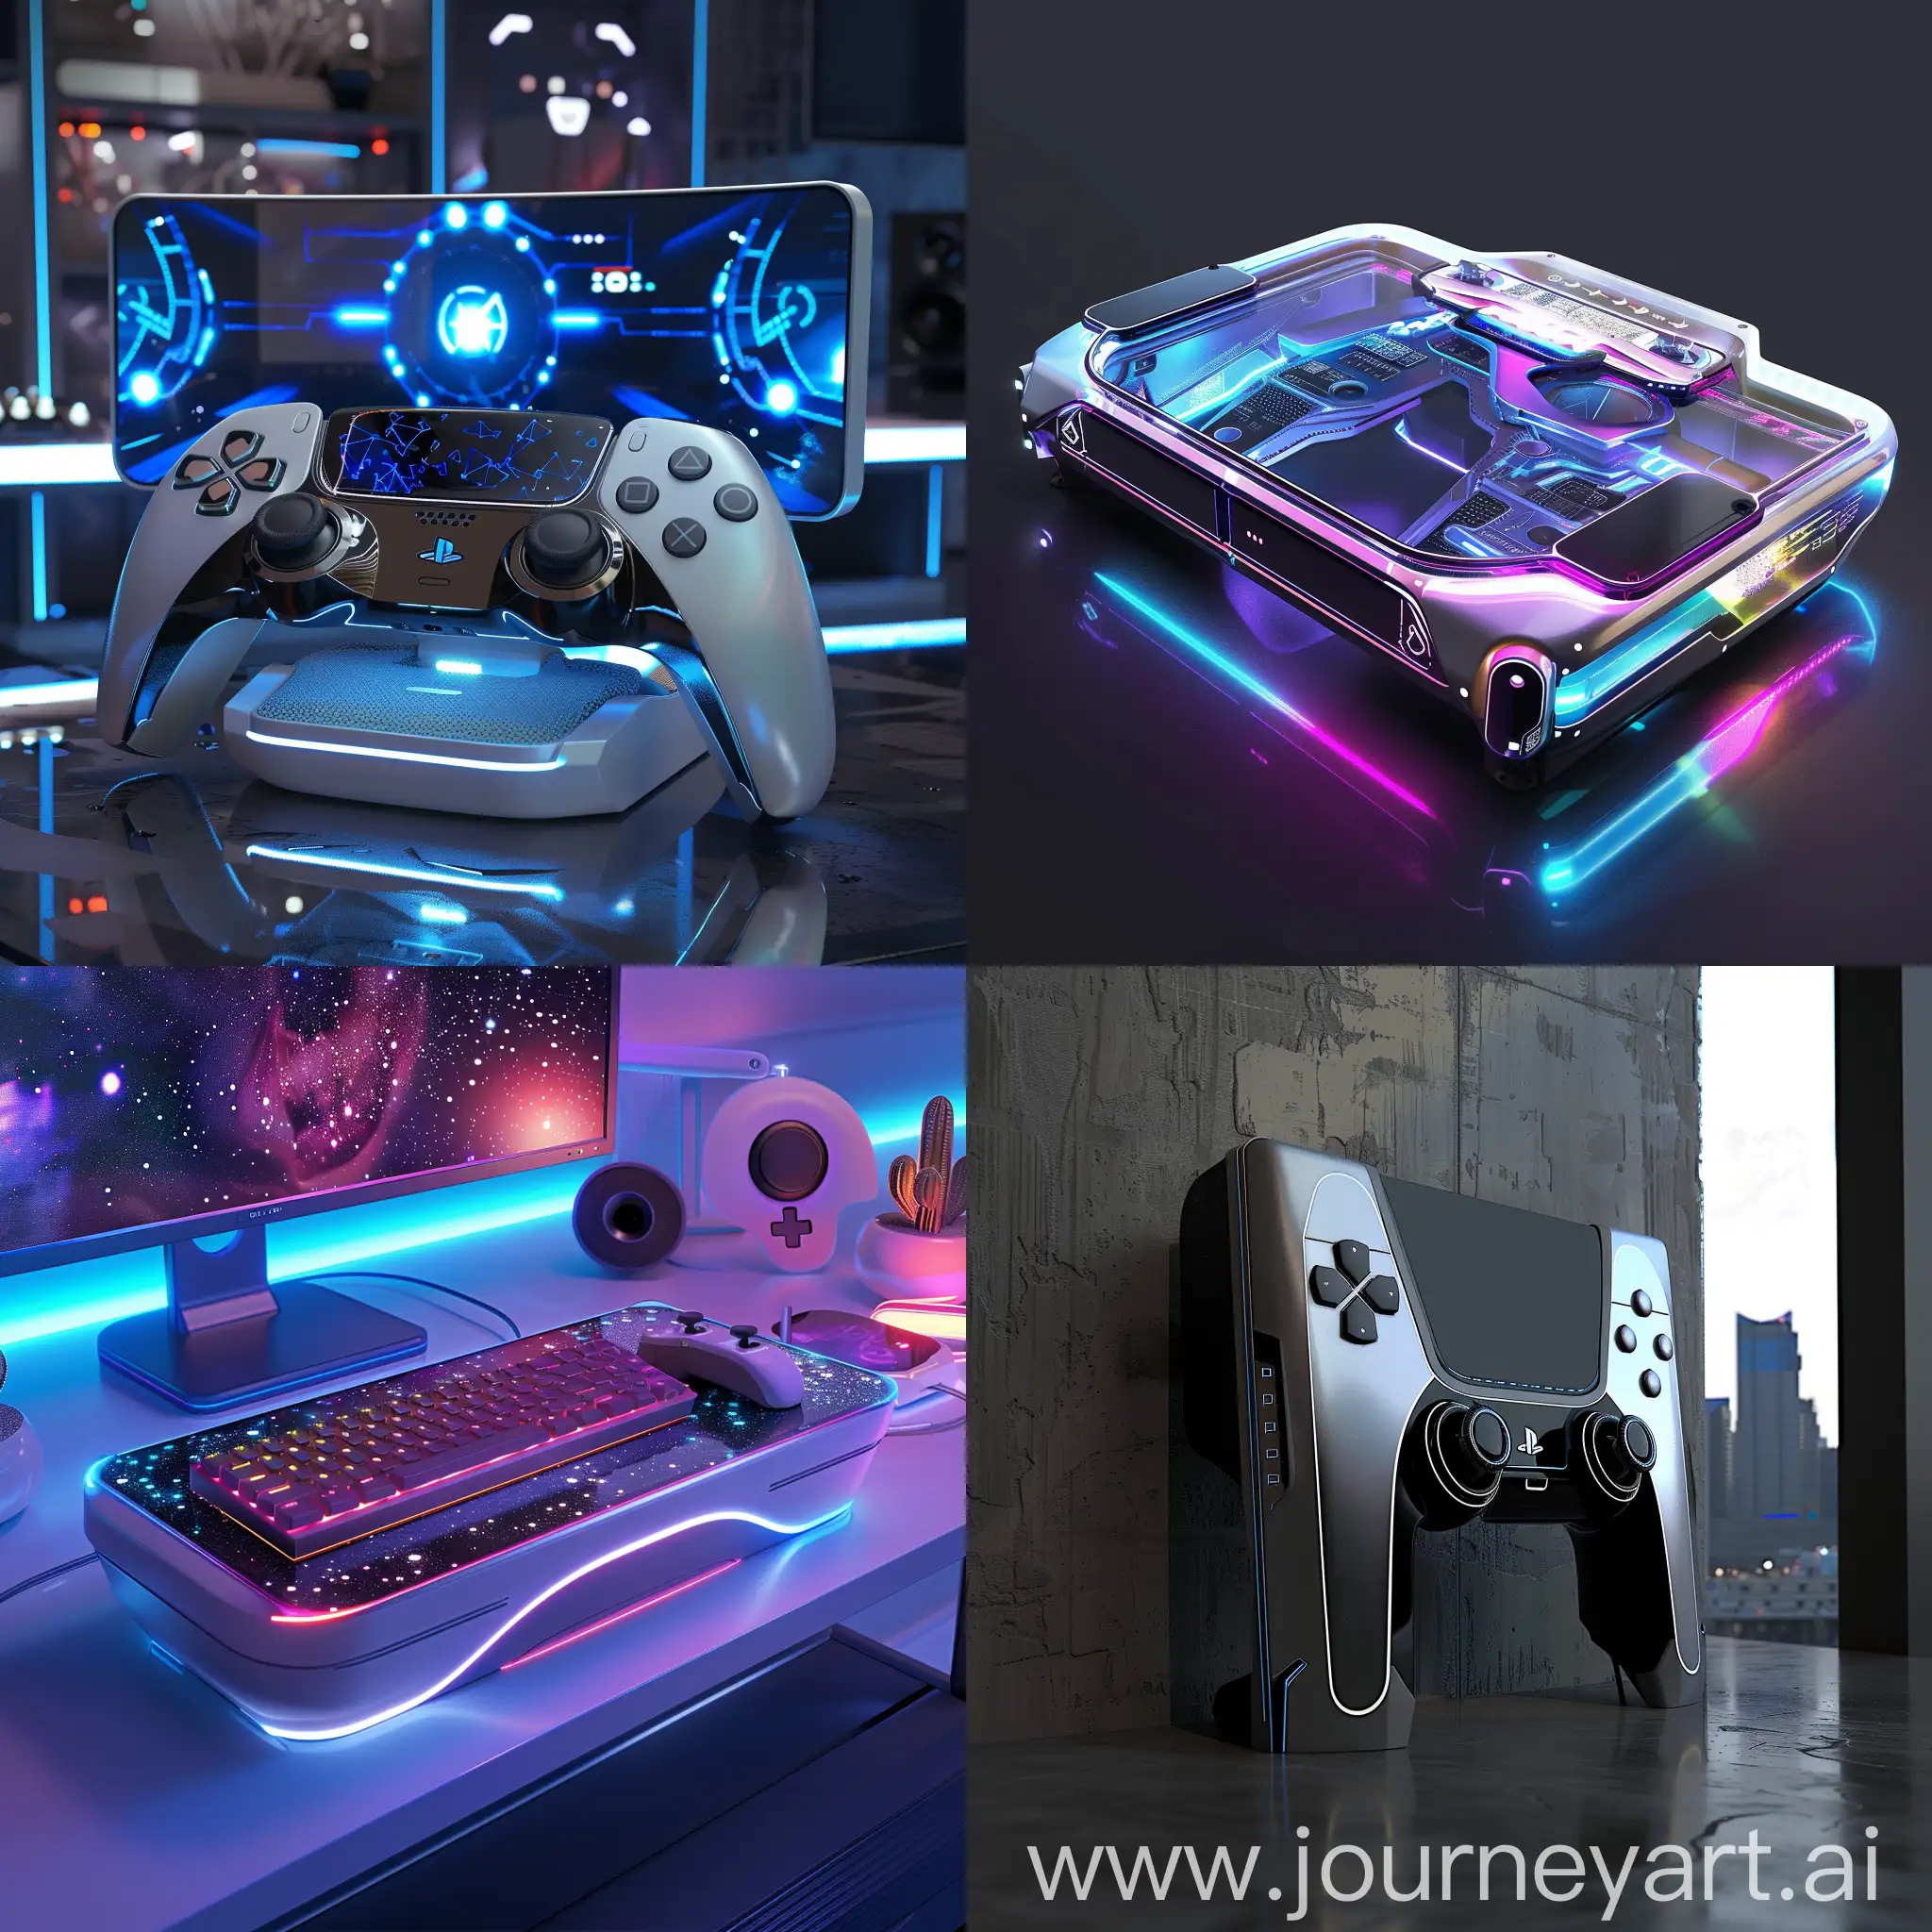 Futuristic-Modular-Gaming-Console-with-AIEnhanced-Performance-and-Holographic-Display